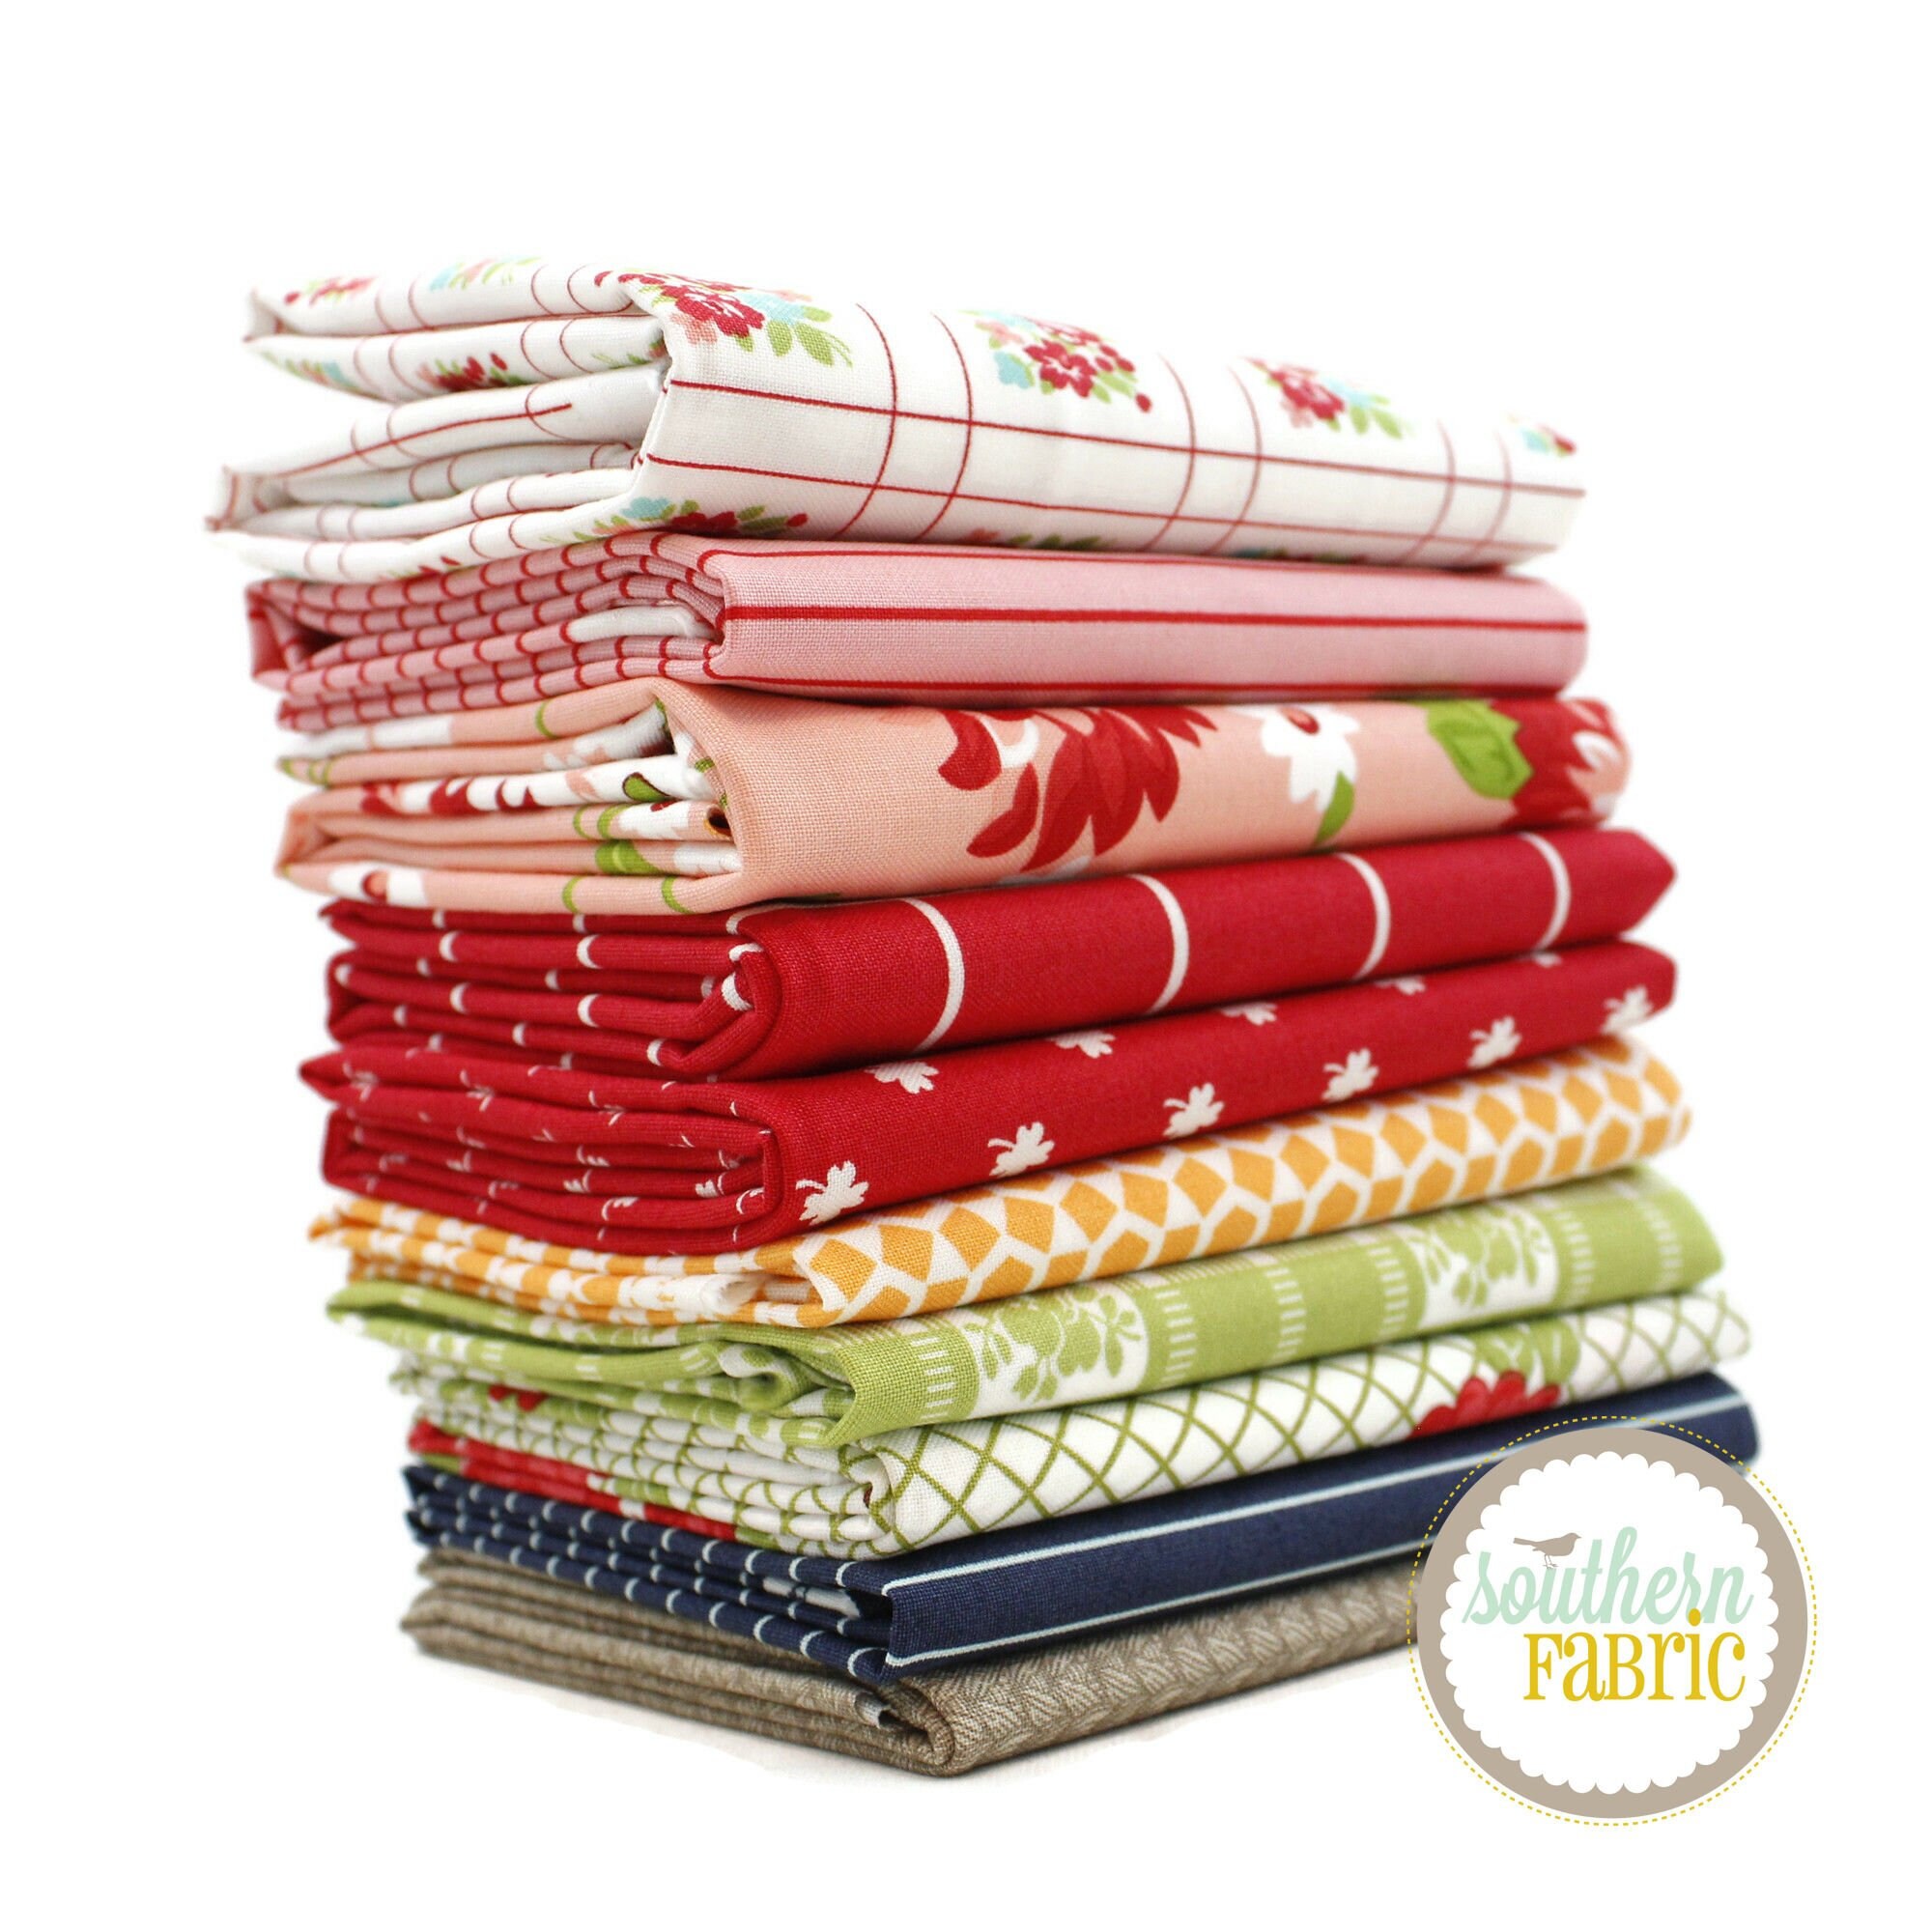 iNee Fat Quarters Fabric Bundles, Precut Cotton Fabric Squares for Sewing  Quilting, 18 x 22 inches, Red